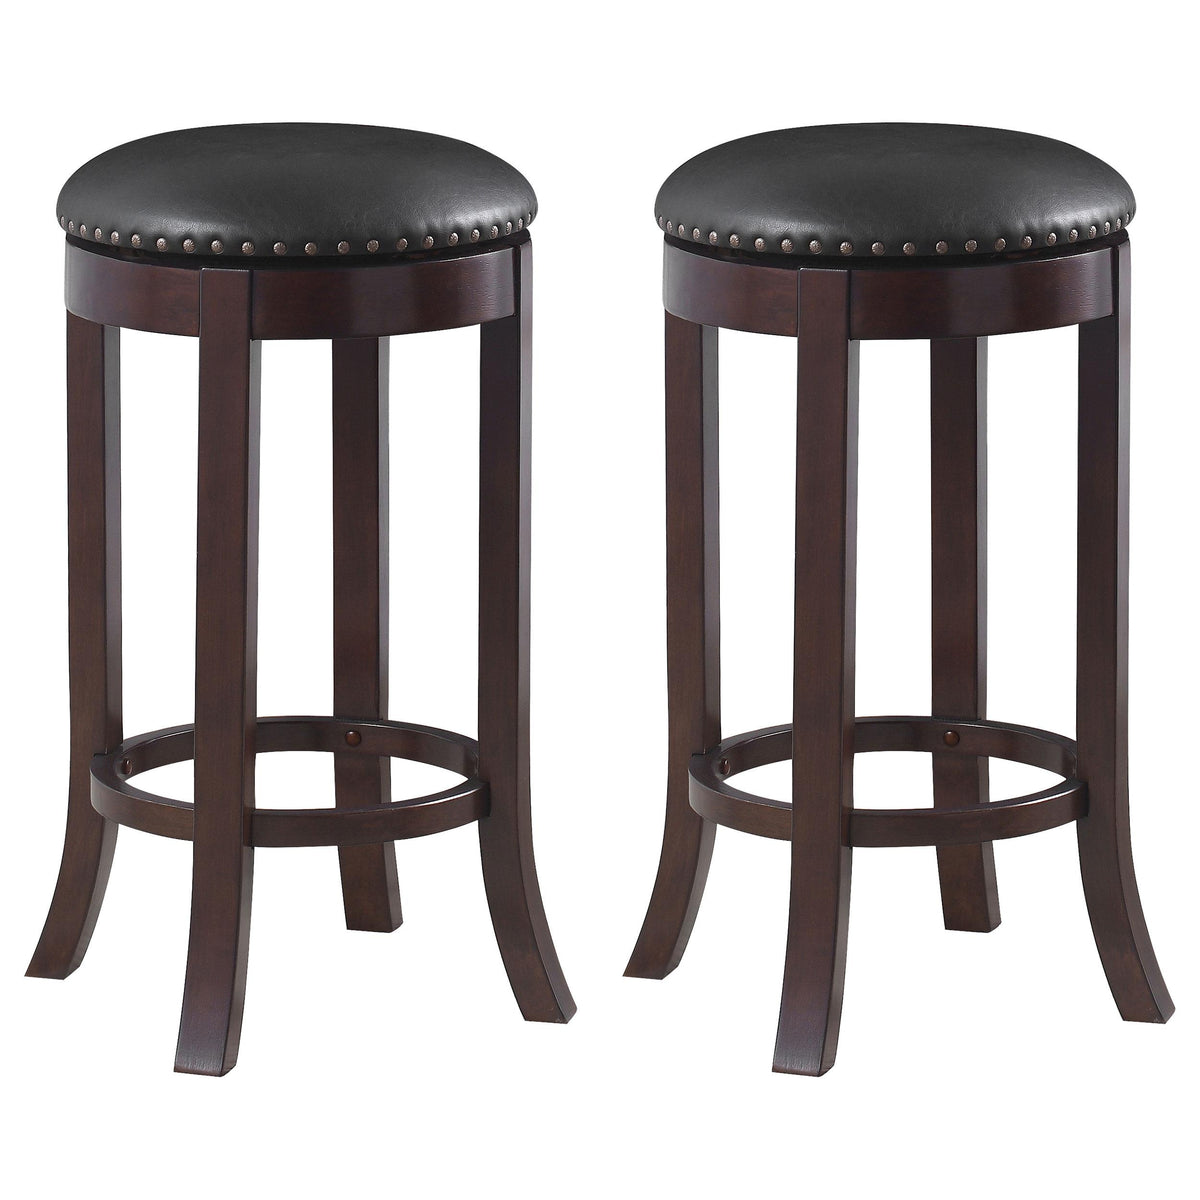 Aboushi Swivel Bar Stools with Upholstered Seat Brown (Set of 2)  Half Price Furniture